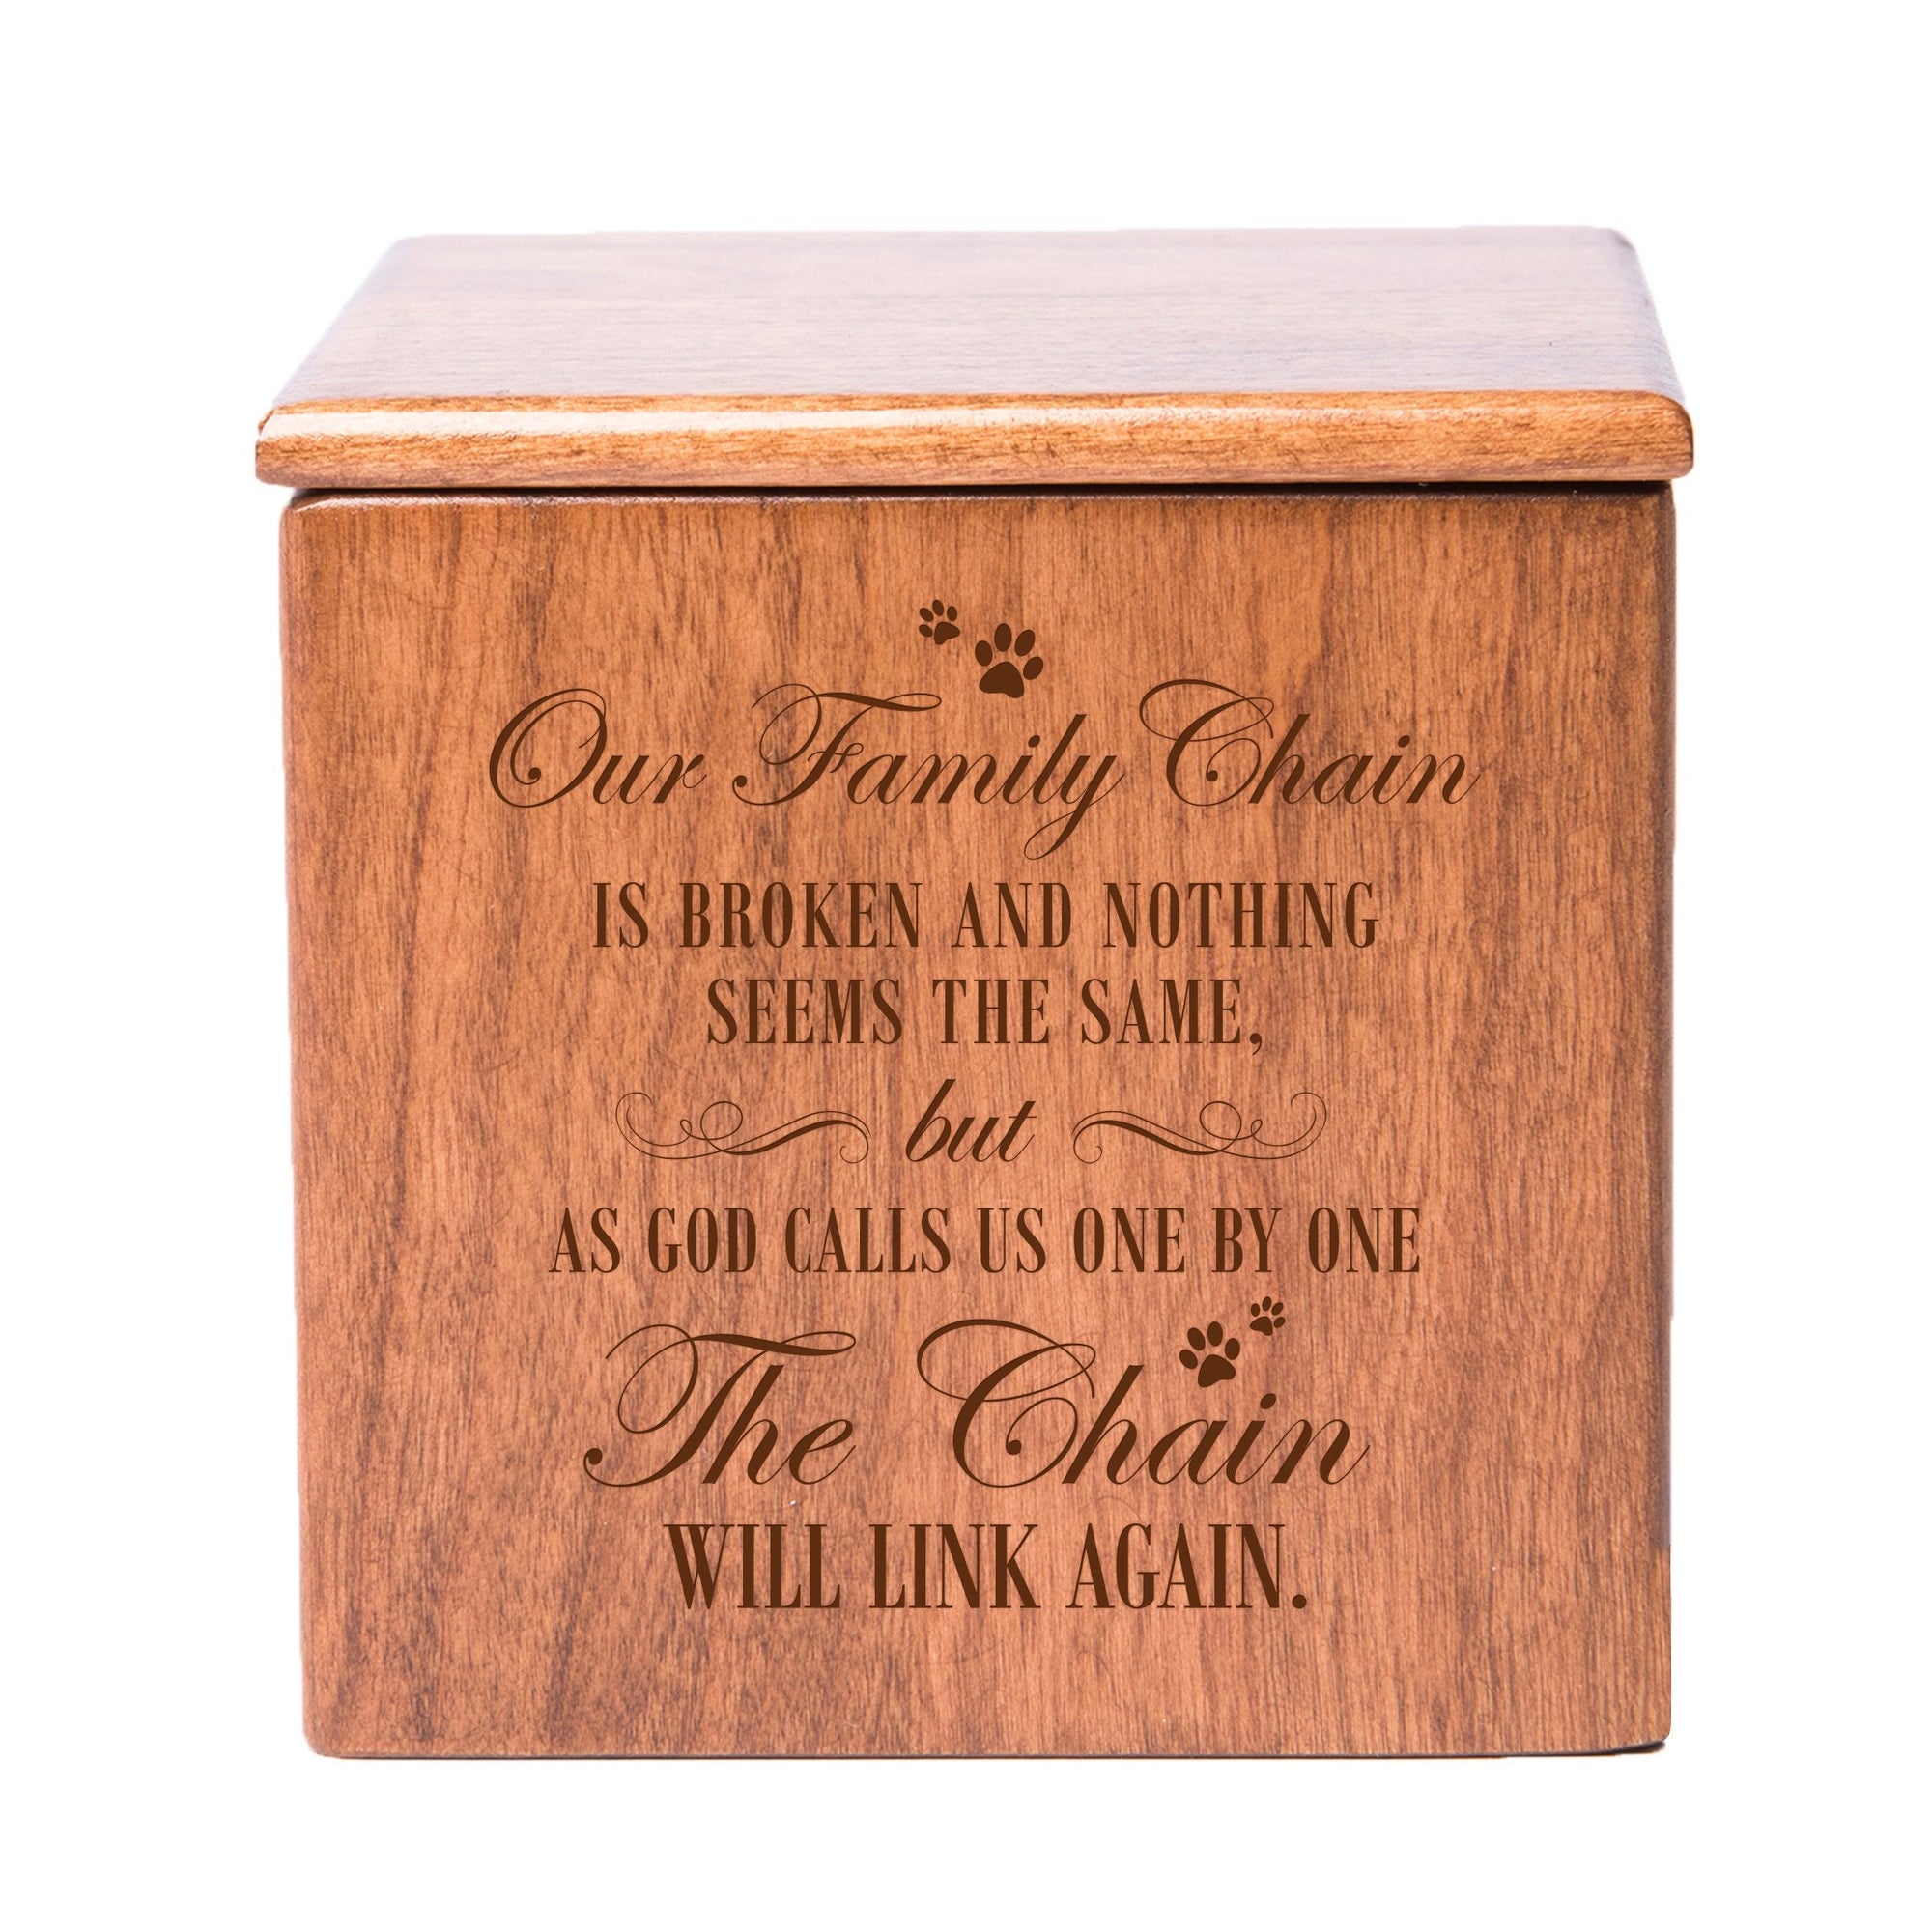 Cherry Pet Memorial 3.5x3.5 Keepsake Urn with phrase "Our Family Chain"